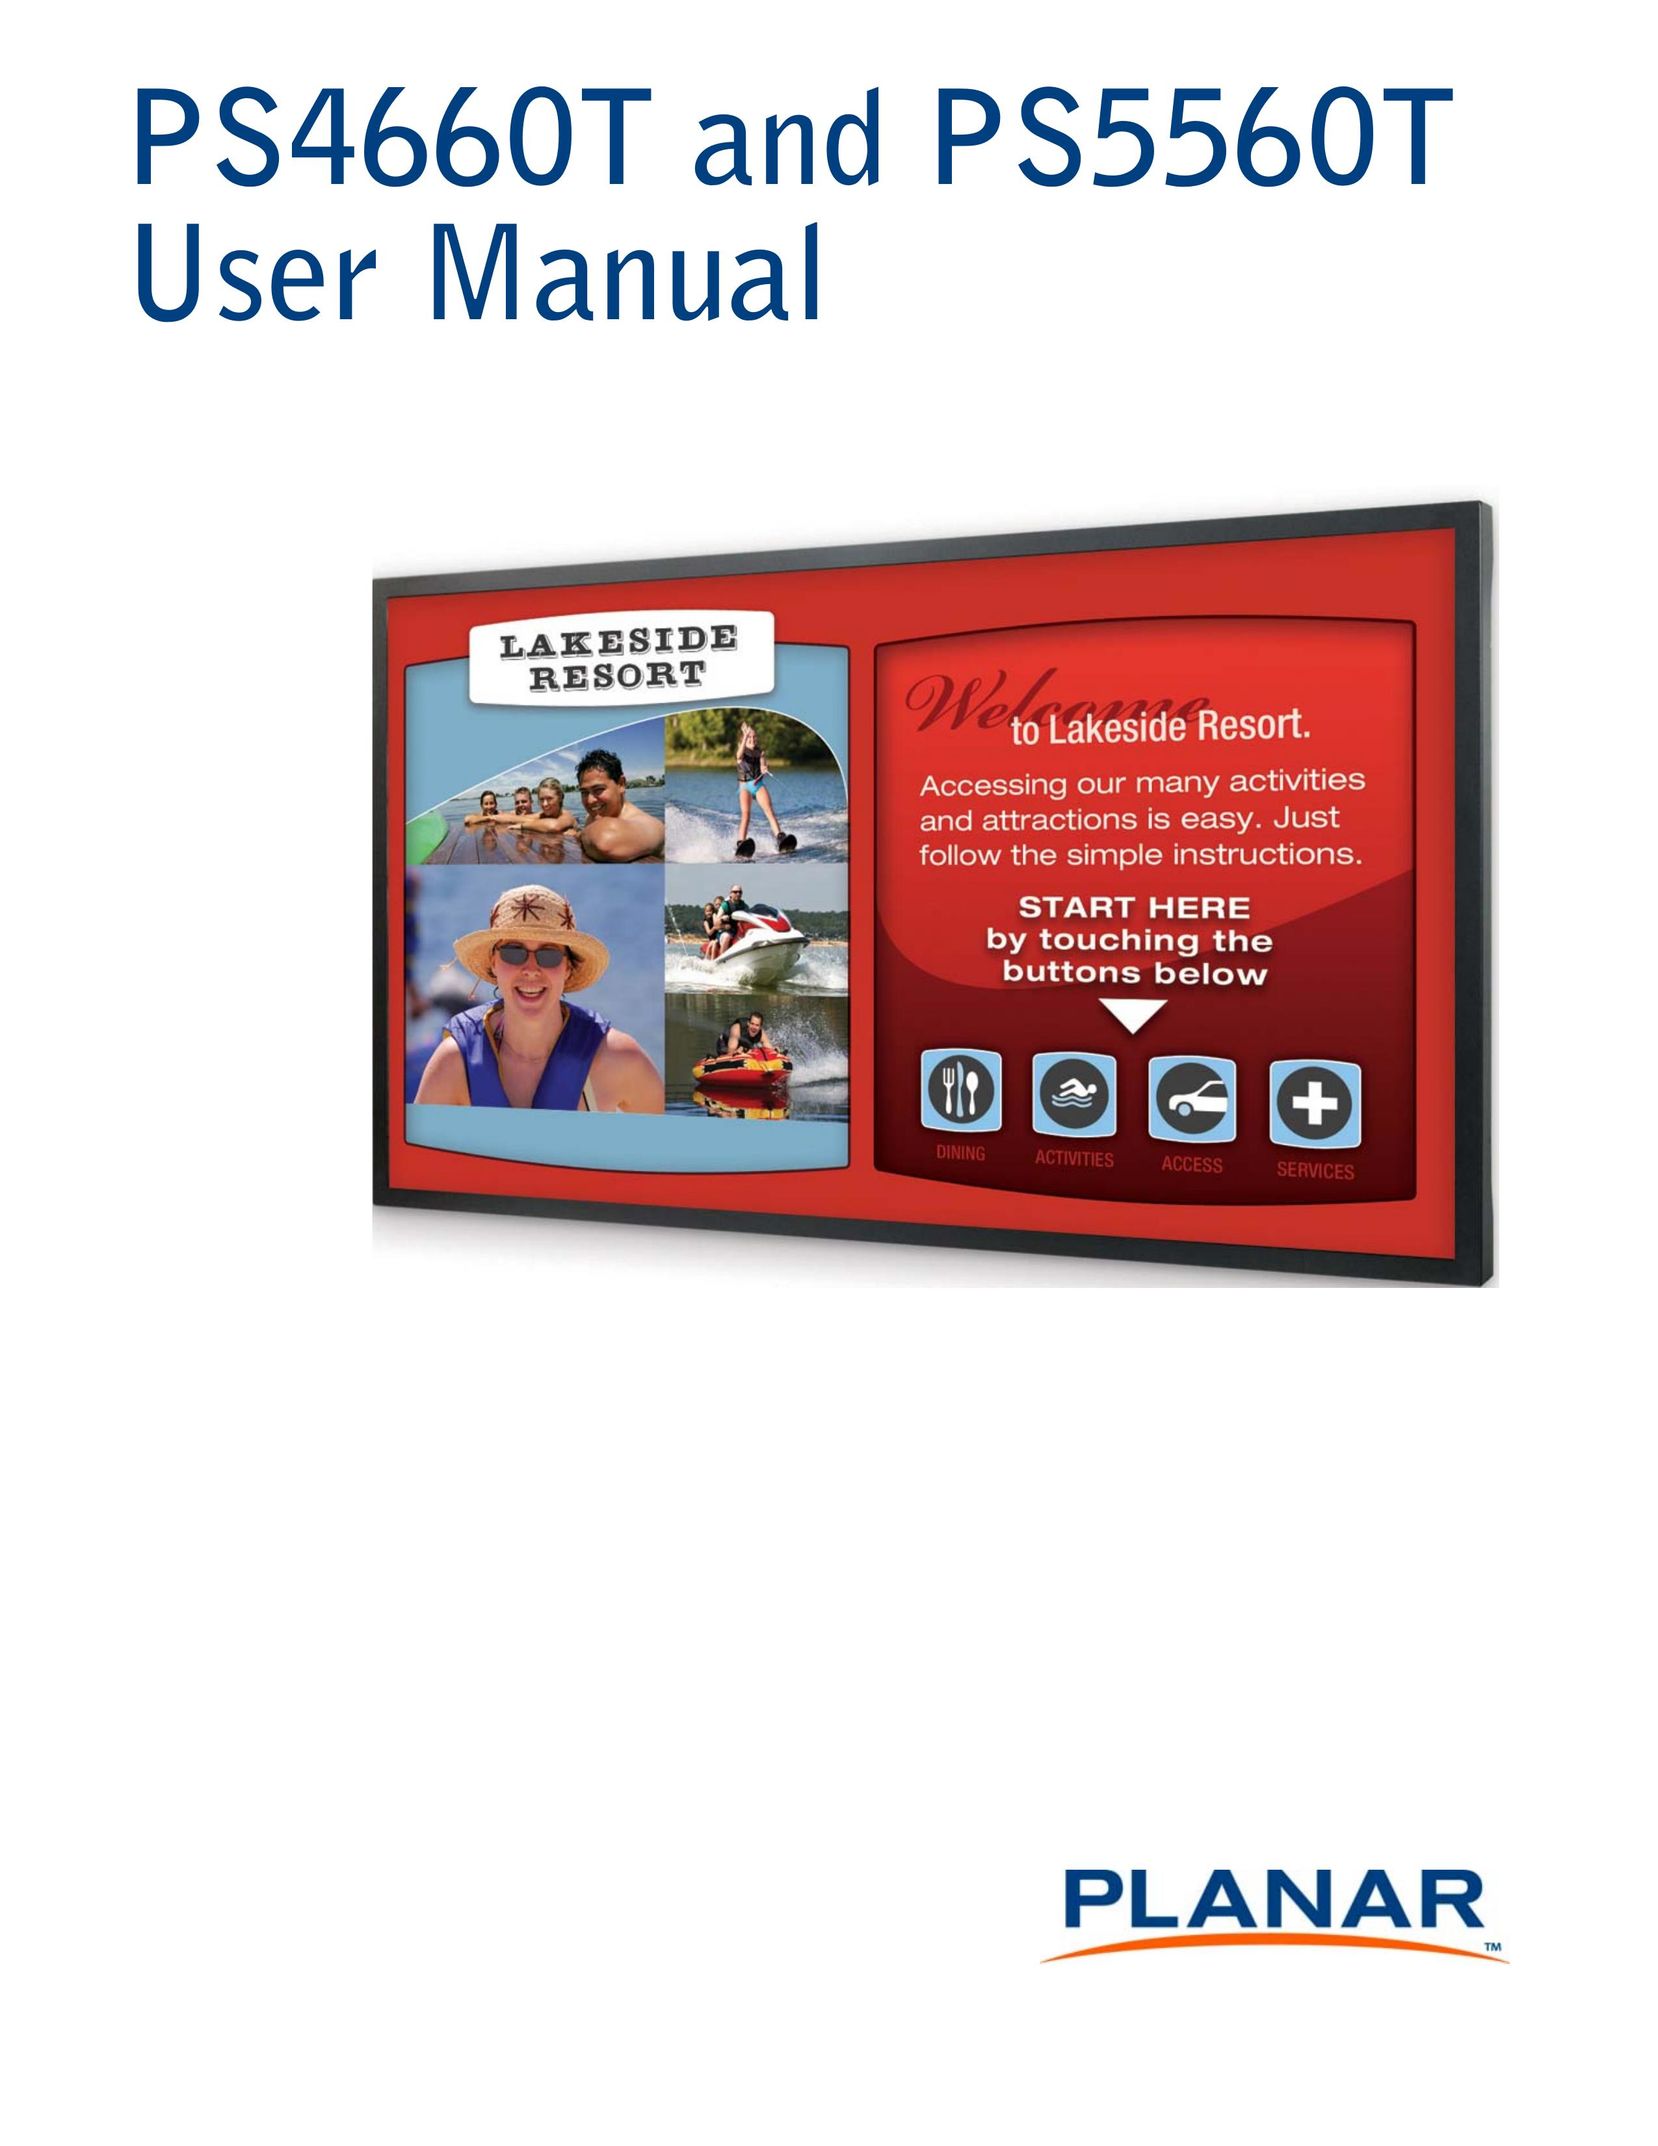 Planar PS4660T and PS5560T Webcam User Manual